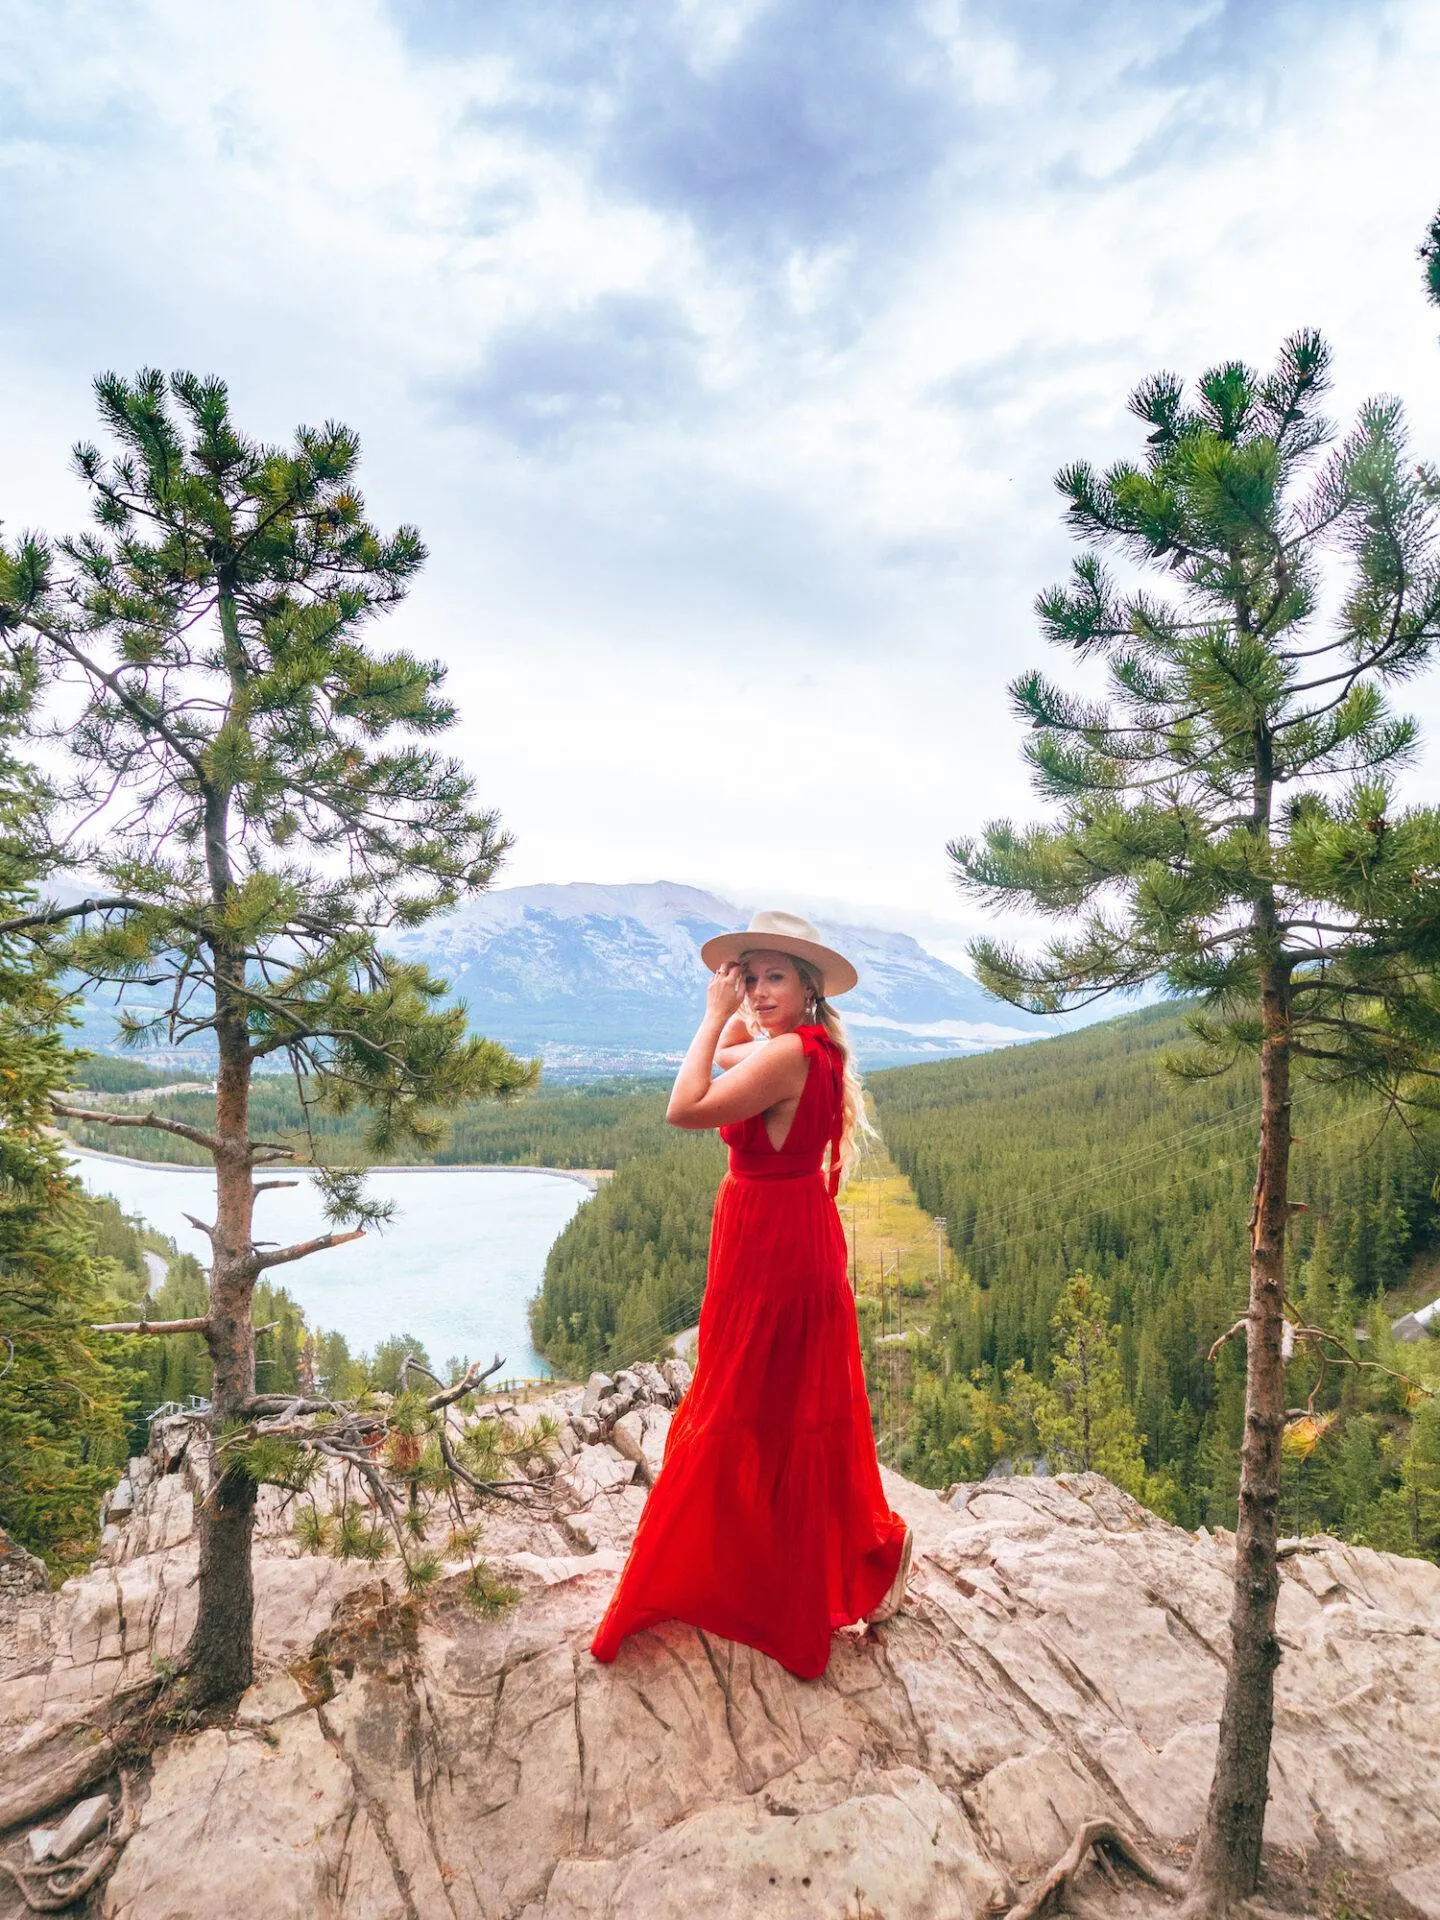 Visiting Banff National Park soon? Don't miss this guide of the 50 best things to in Banff for every kind of traveler! I recently spent 8 days exploring the area and took notes along the way so I could write you the most comprehensive guide possible. This guide includes all the top attractions, hikes, restaurants, and sights you definitely won't want to miss when you visit Banff National Park. I also include any tips you might need when visiting the area! Pictured here: The Grassi Lakes hike in Canmore gives you amazing views!